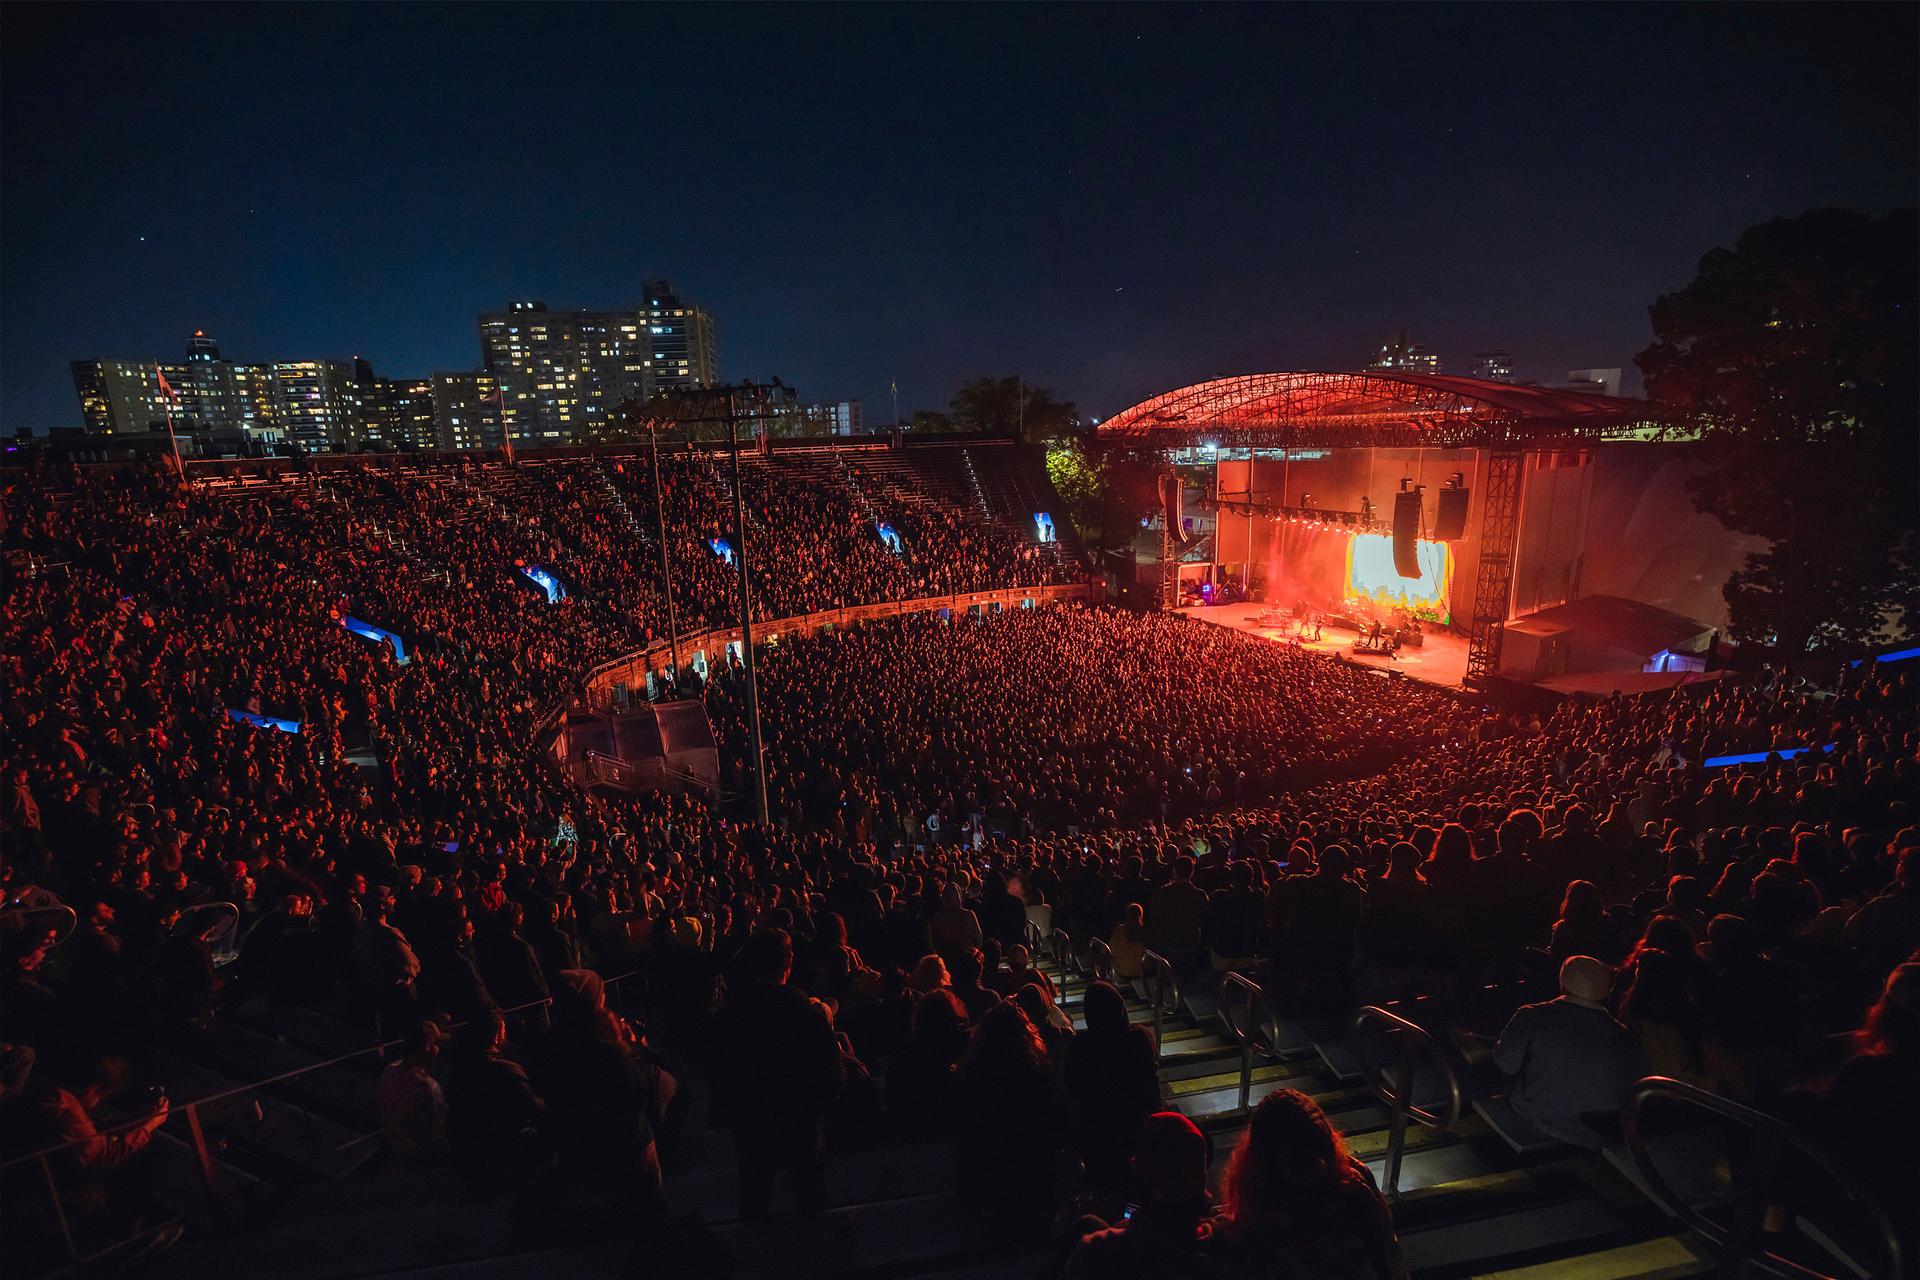 a large crowd of people at a concert at night in a stadium